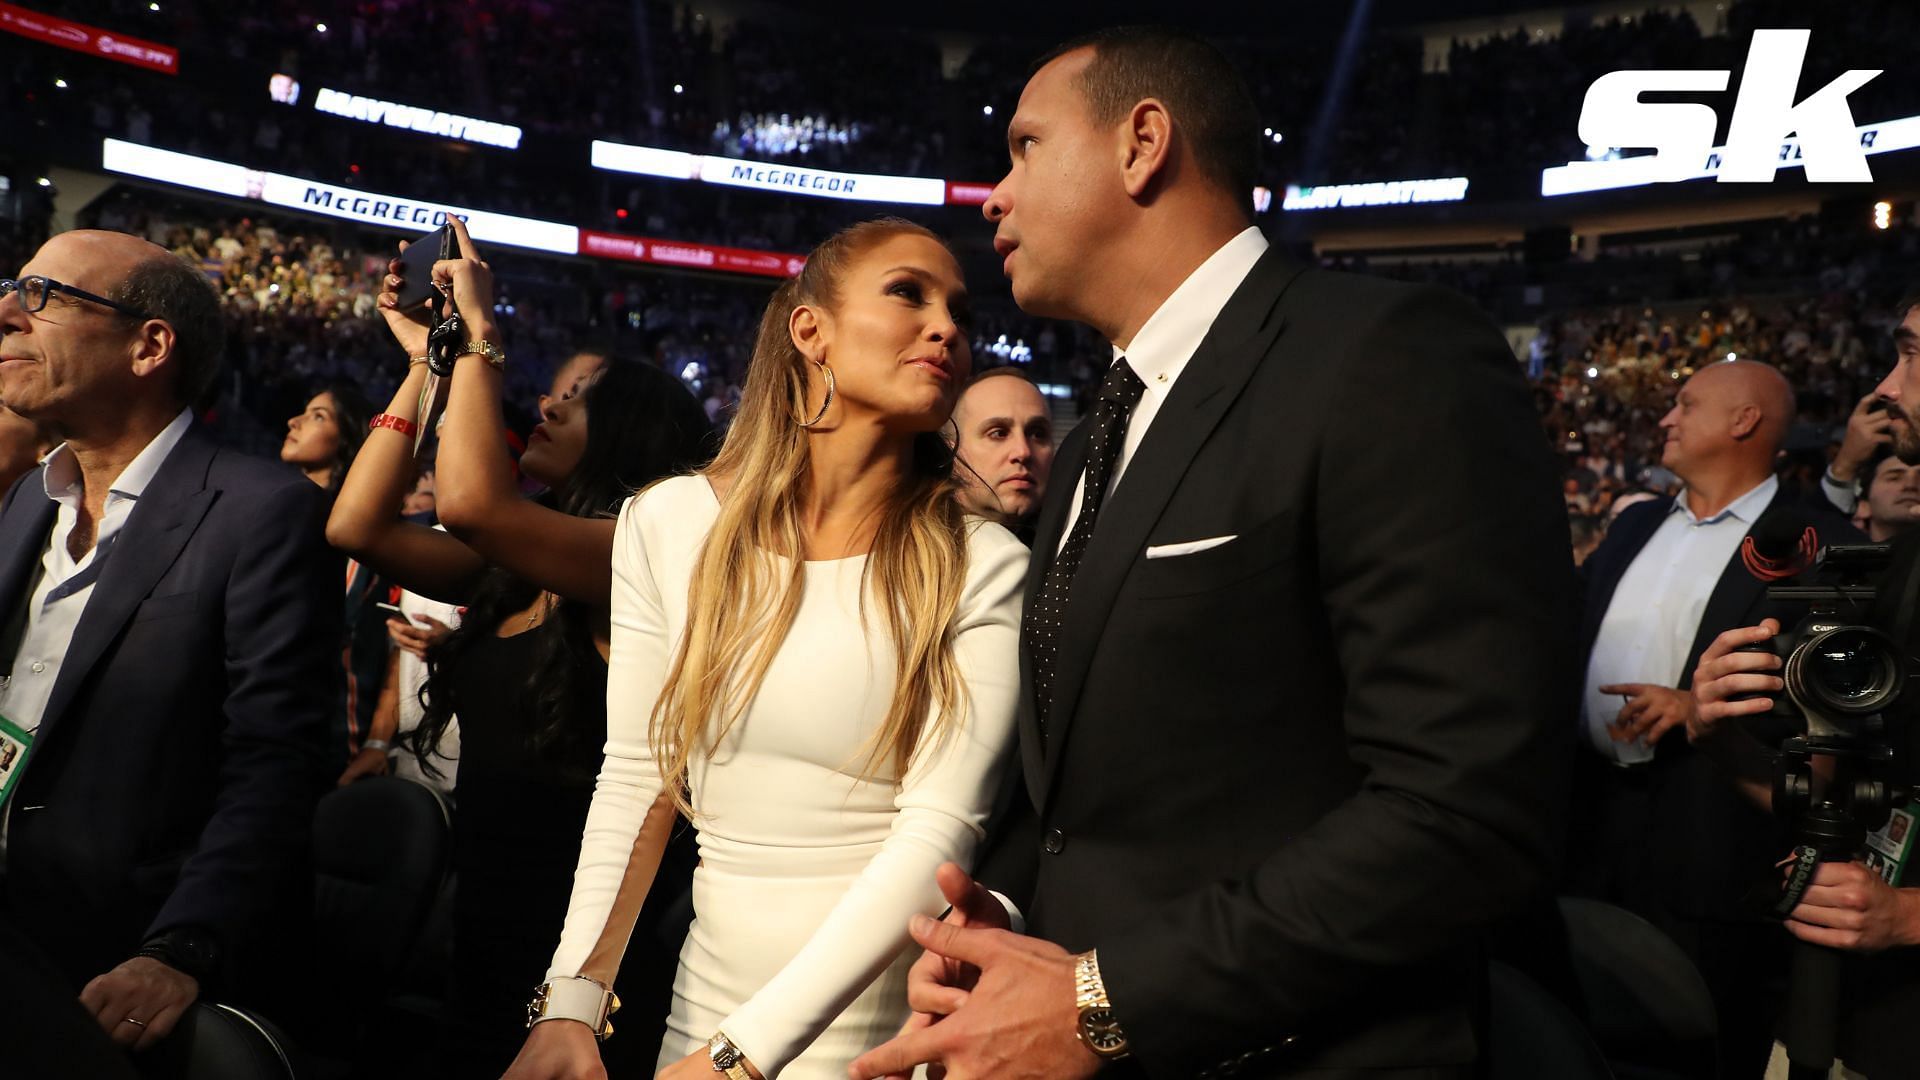 Jennifer Lopez and Alex Rodriguez got engaged in 2019 after dating for two years